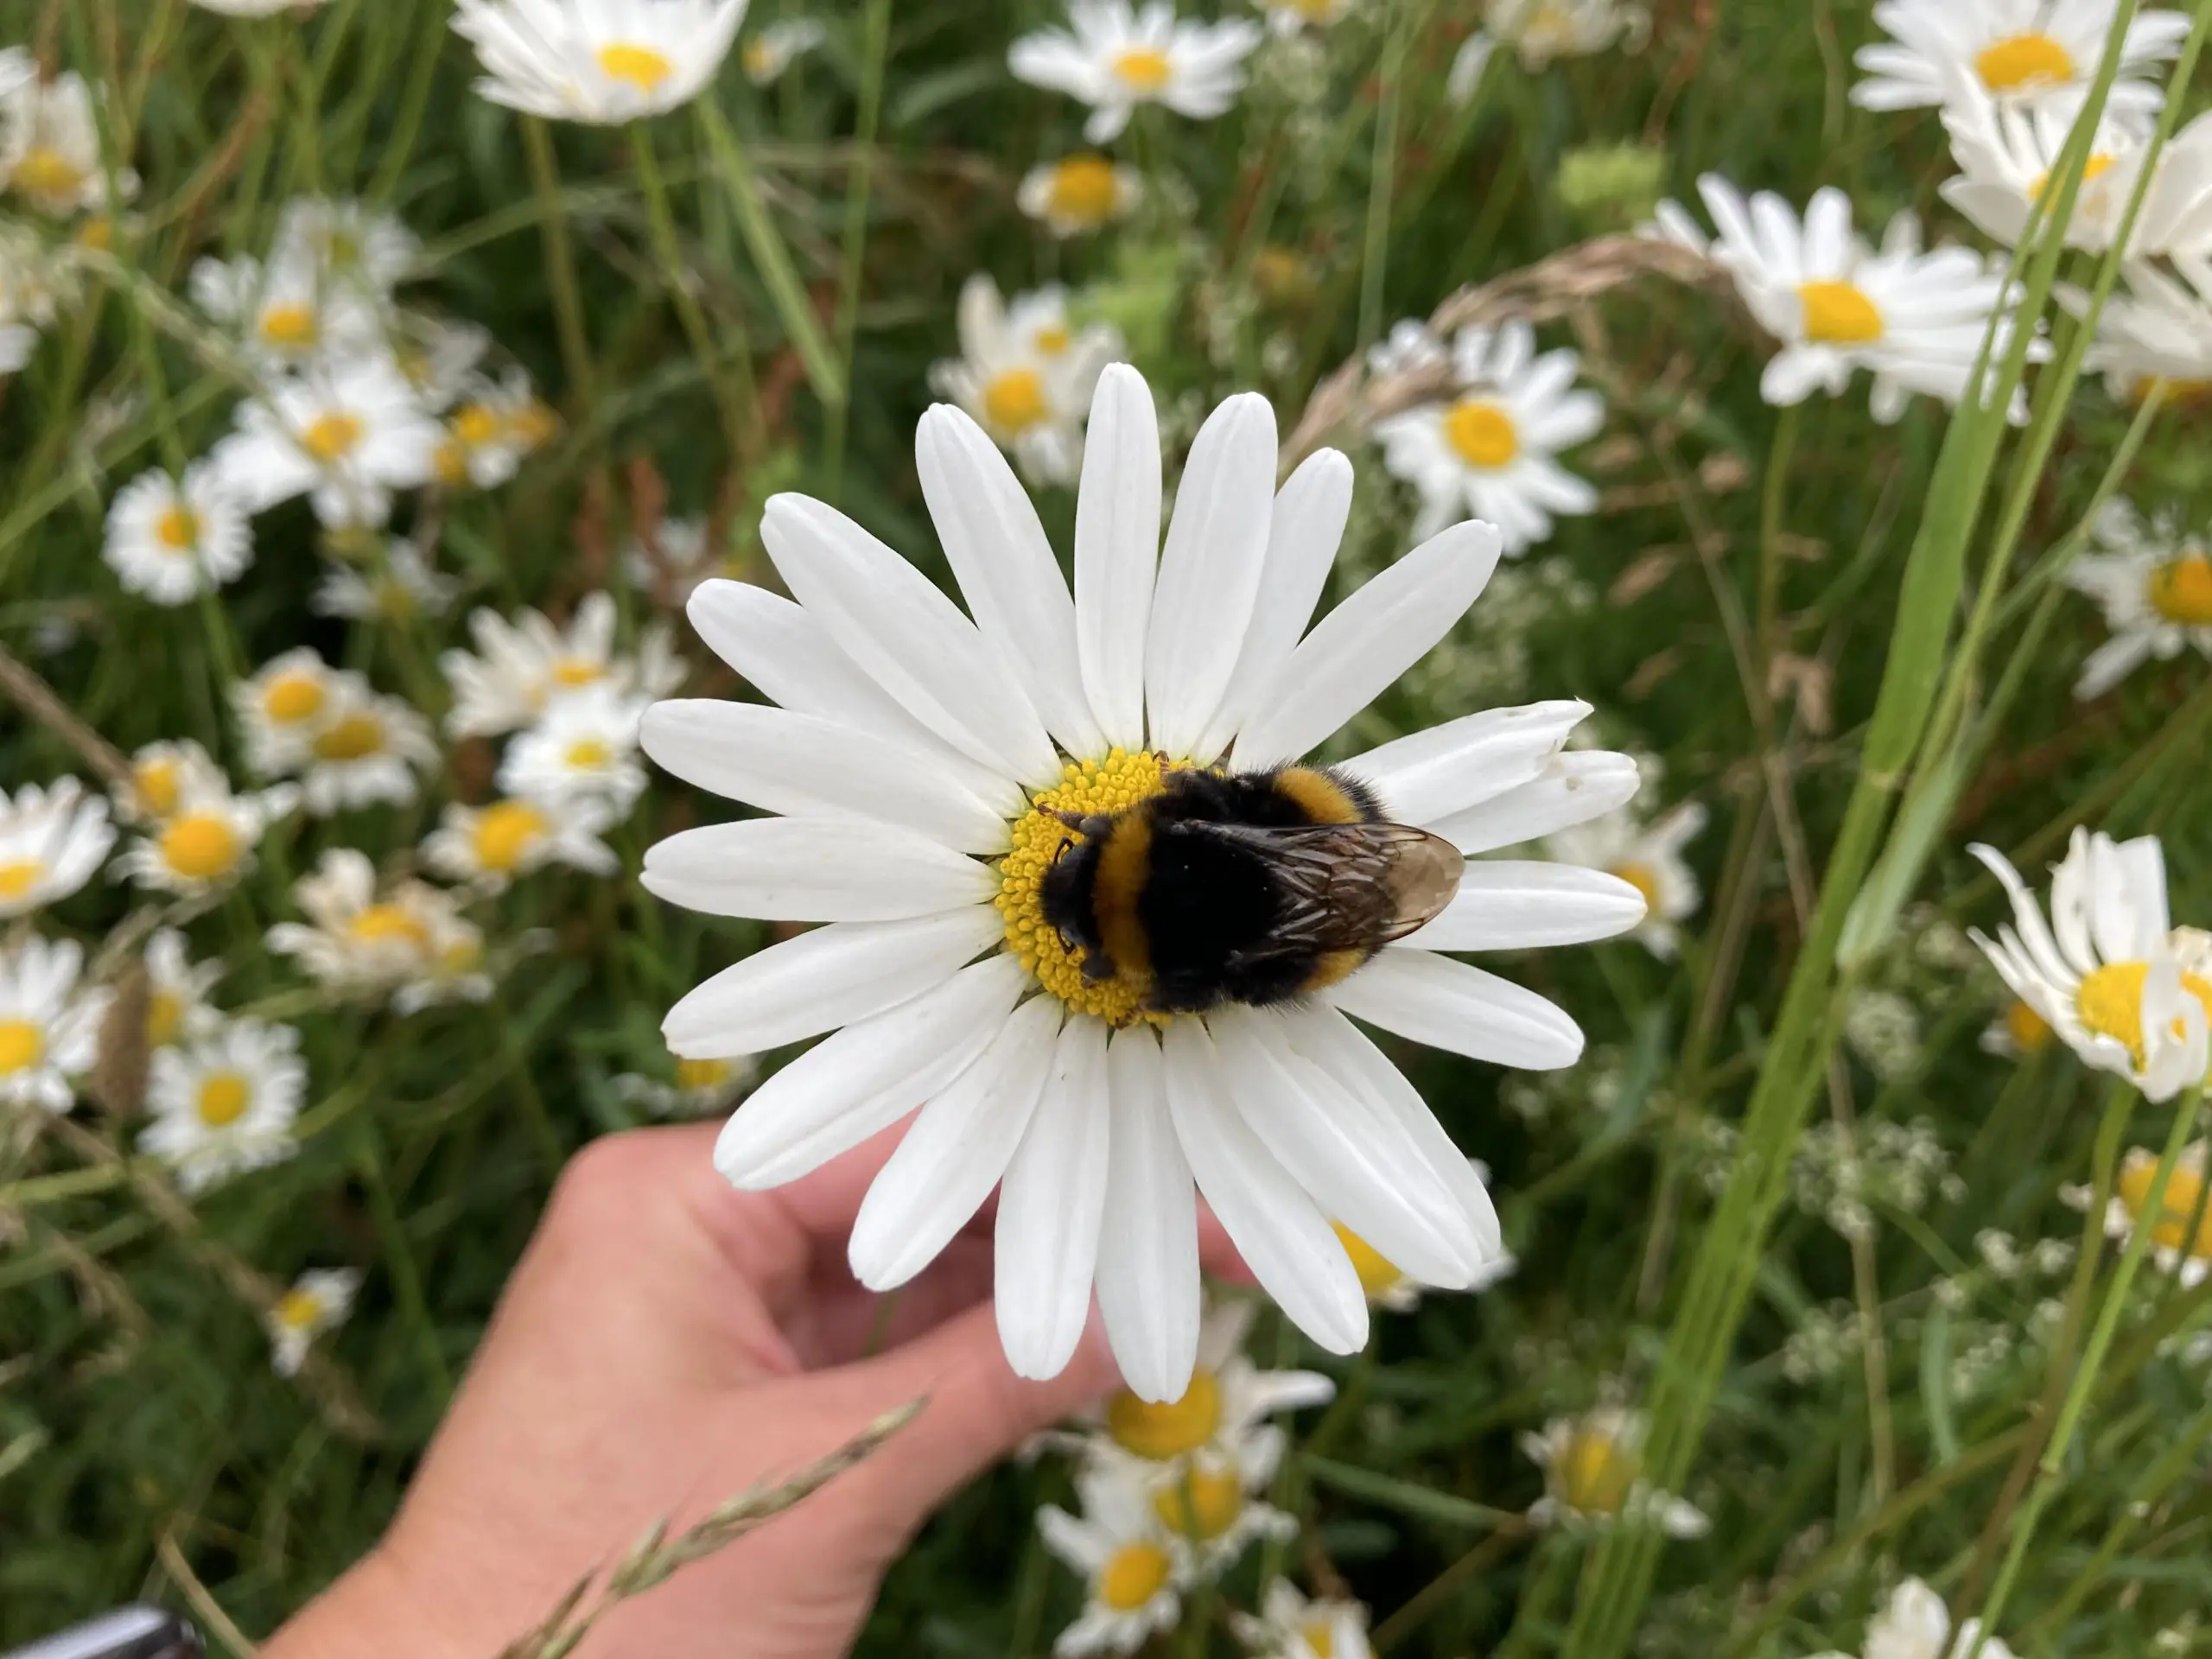 Wildflower species such as ox eye daisies, birds foot trefoil, salad burnet and wild carrot are thriving at Victoria Road meadow in Cirencester, providing shelter and food for important pollinators including bees and many other insects.